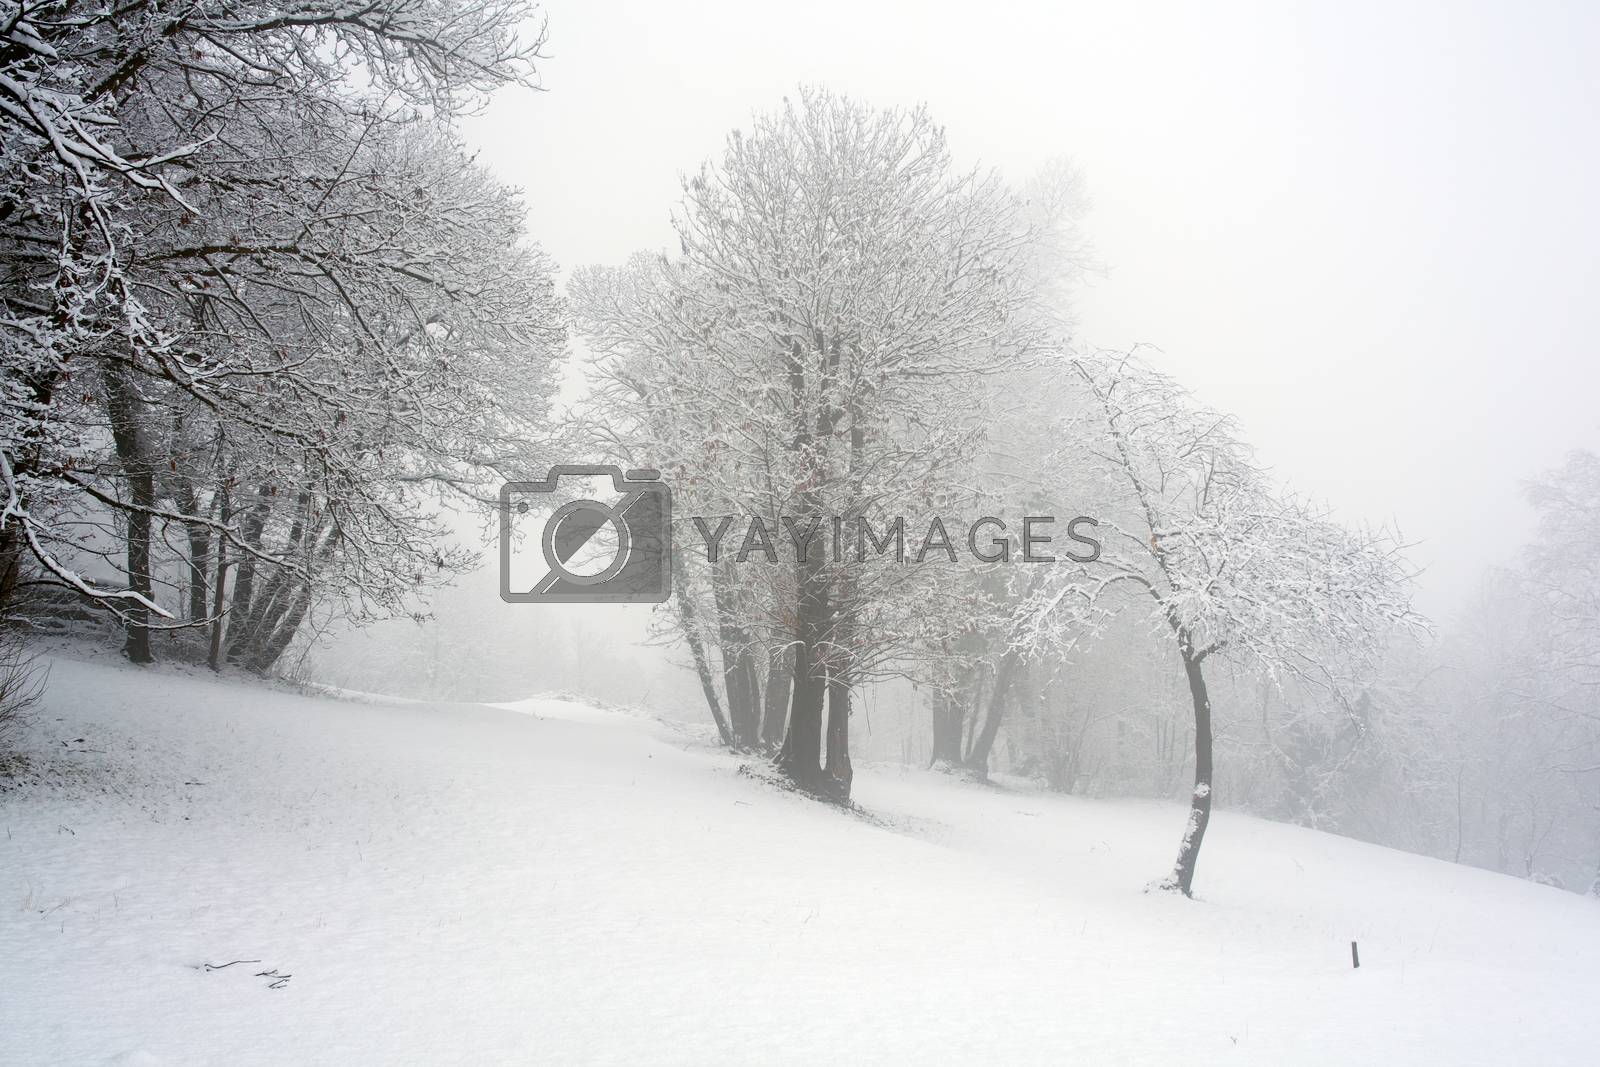 Royalty free image of Snow in the forest by bepsimage